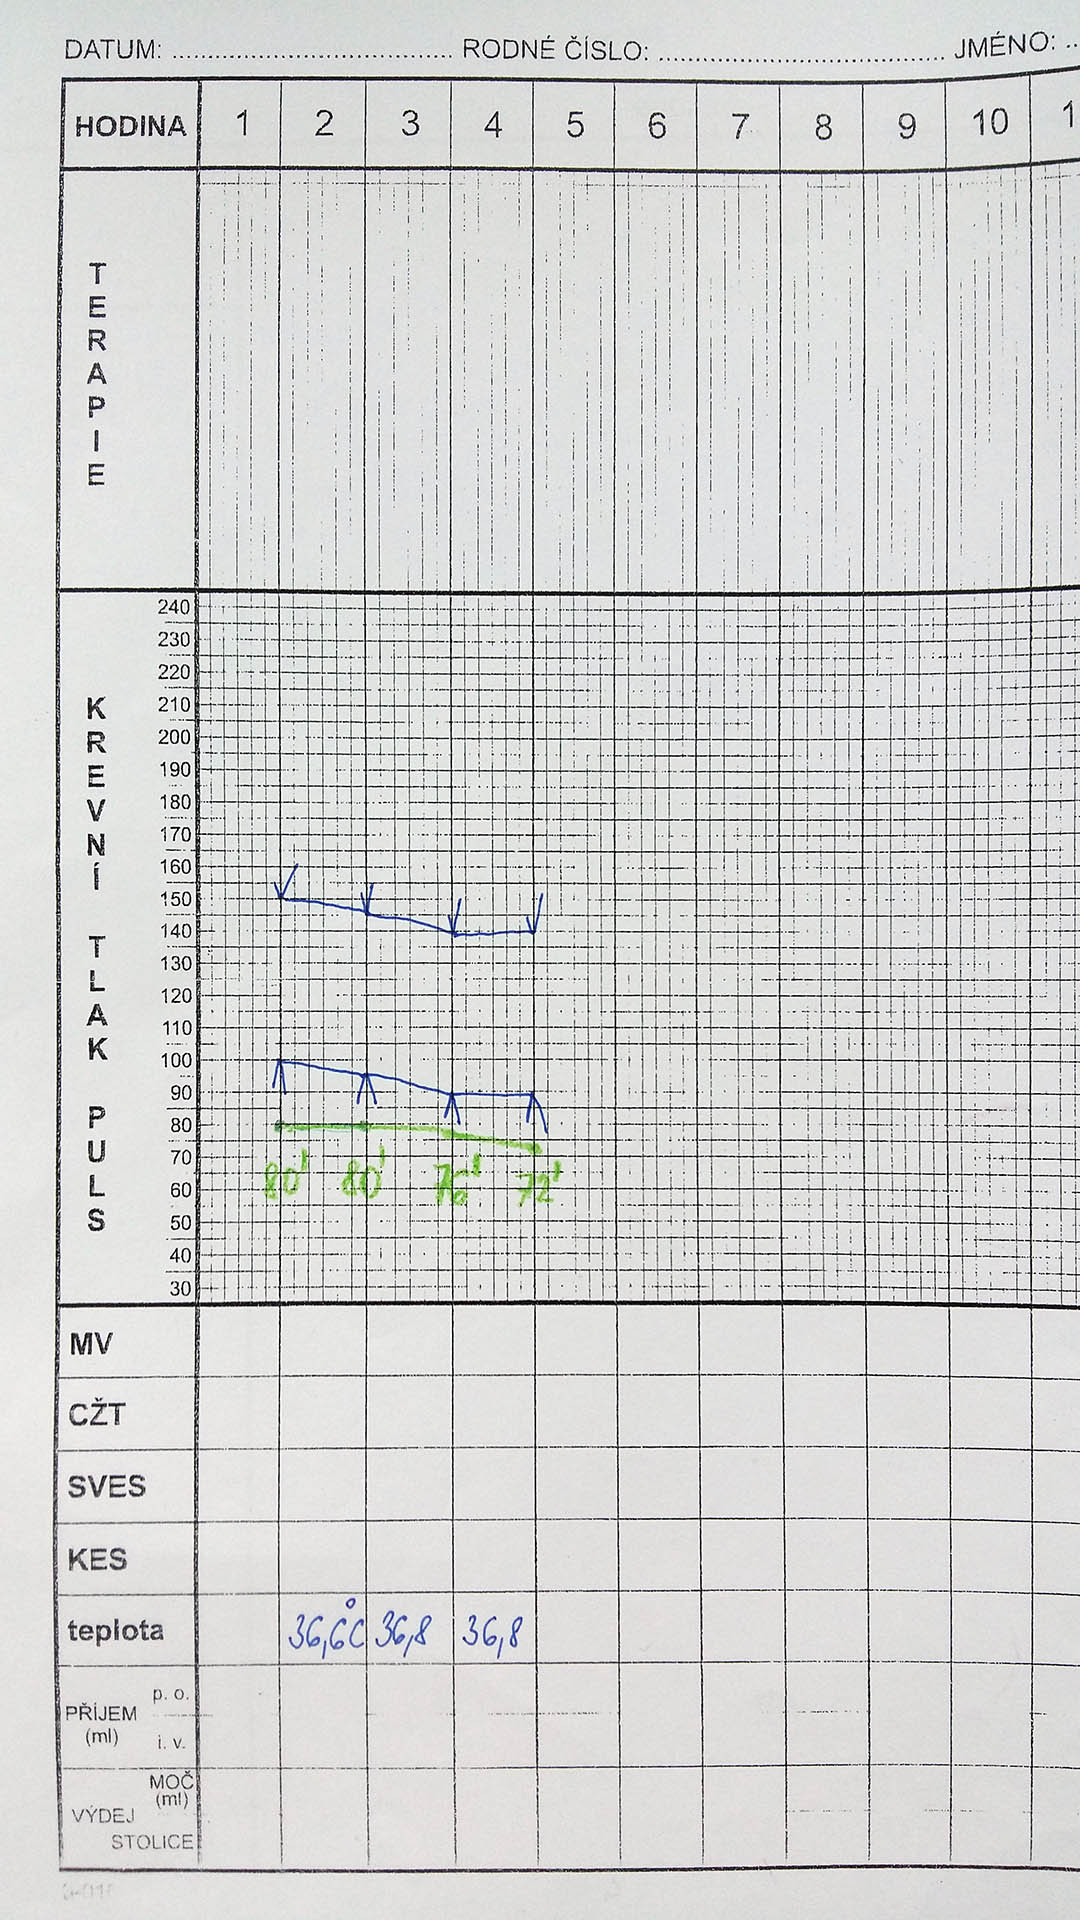 How To Record Vital Signs On A Chart